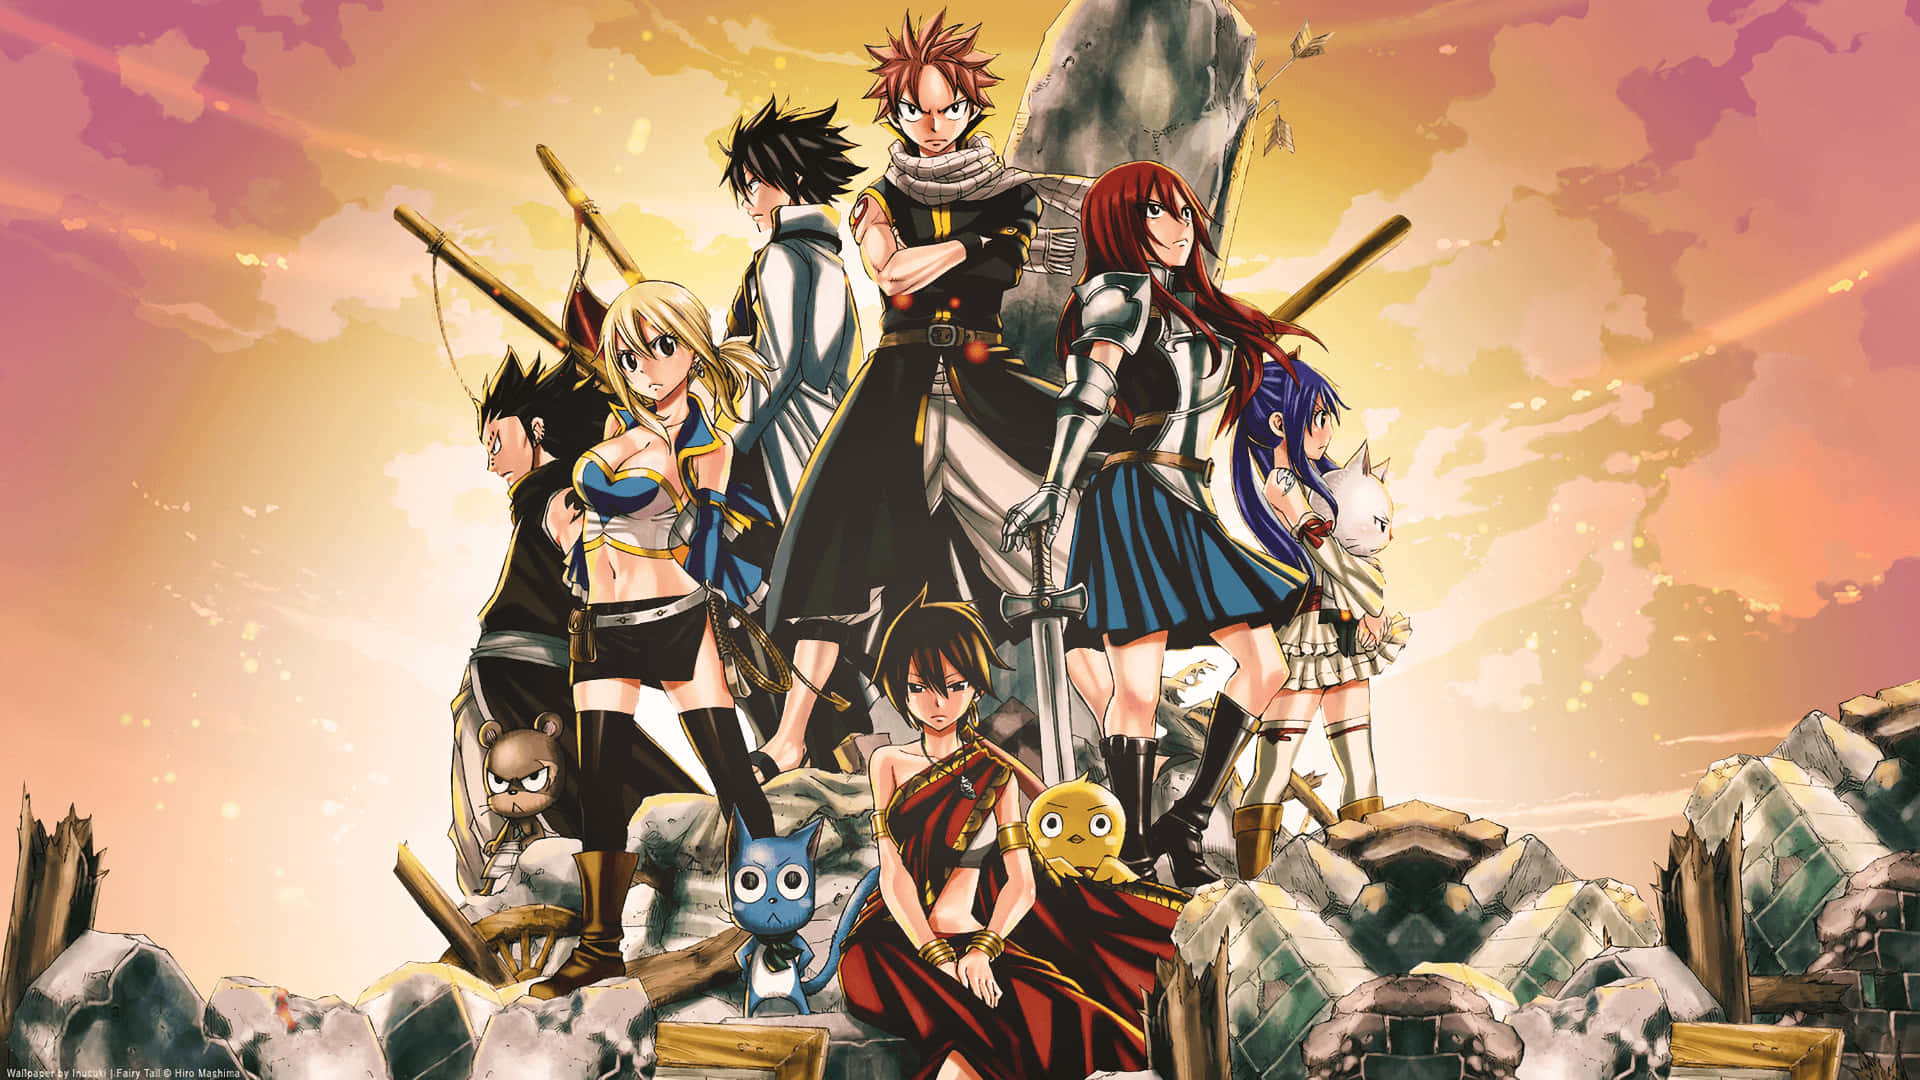 Fairy Tail Aesthetic Iconic Pose Wallpaper